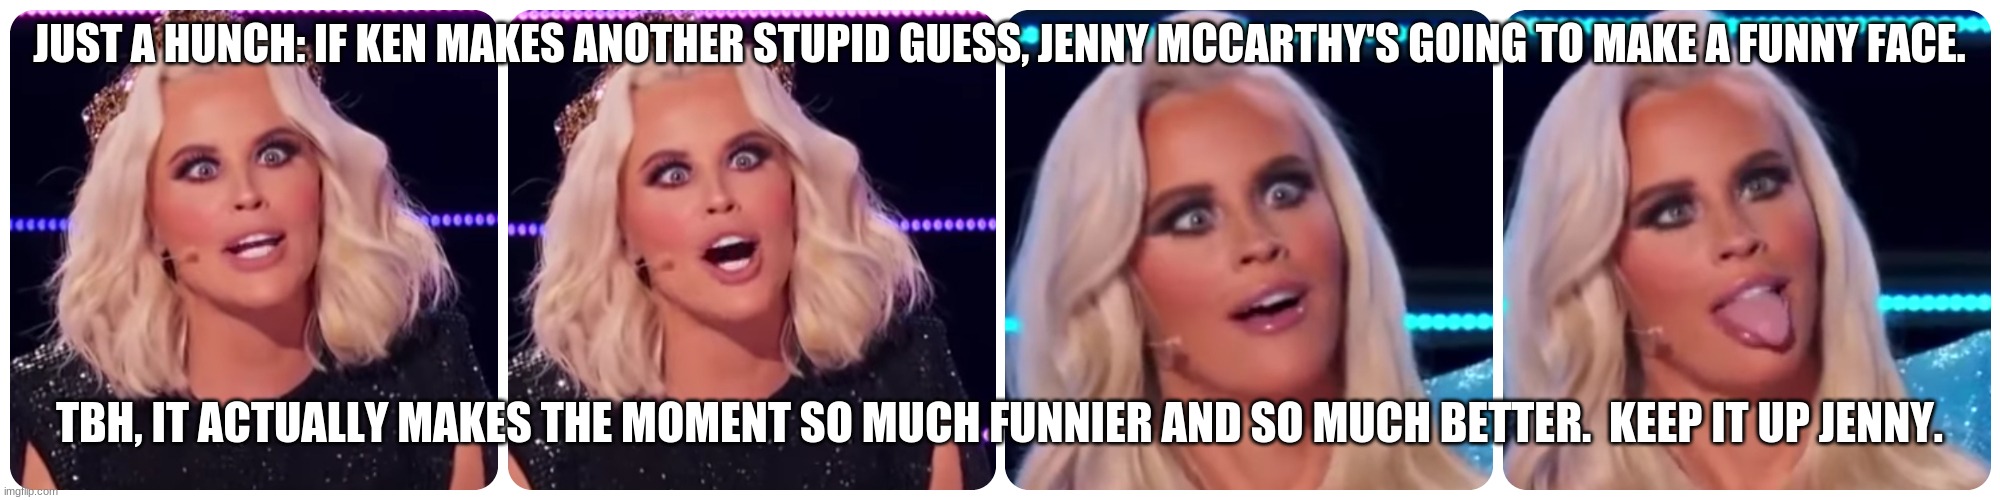 Jenny McCarthy Masked Singer Funny Face |  JUST A HUNCH: IF KEN MAKES ANOTHER STUPID GUESS, JENNY MCCARTHY'S GOING TO MAKE A FUNNY FACE. TBH, IT ACTUALLY MAKES THE MOMENT SO MUCH FUNNIER AND SO MUCH BETTER.  KEEP IT UP JENNY. | image tagged in jenny mccarthy,funny face,ken jeong,masked singer,ken's bad guesses | made w/ Imgflip meme maker